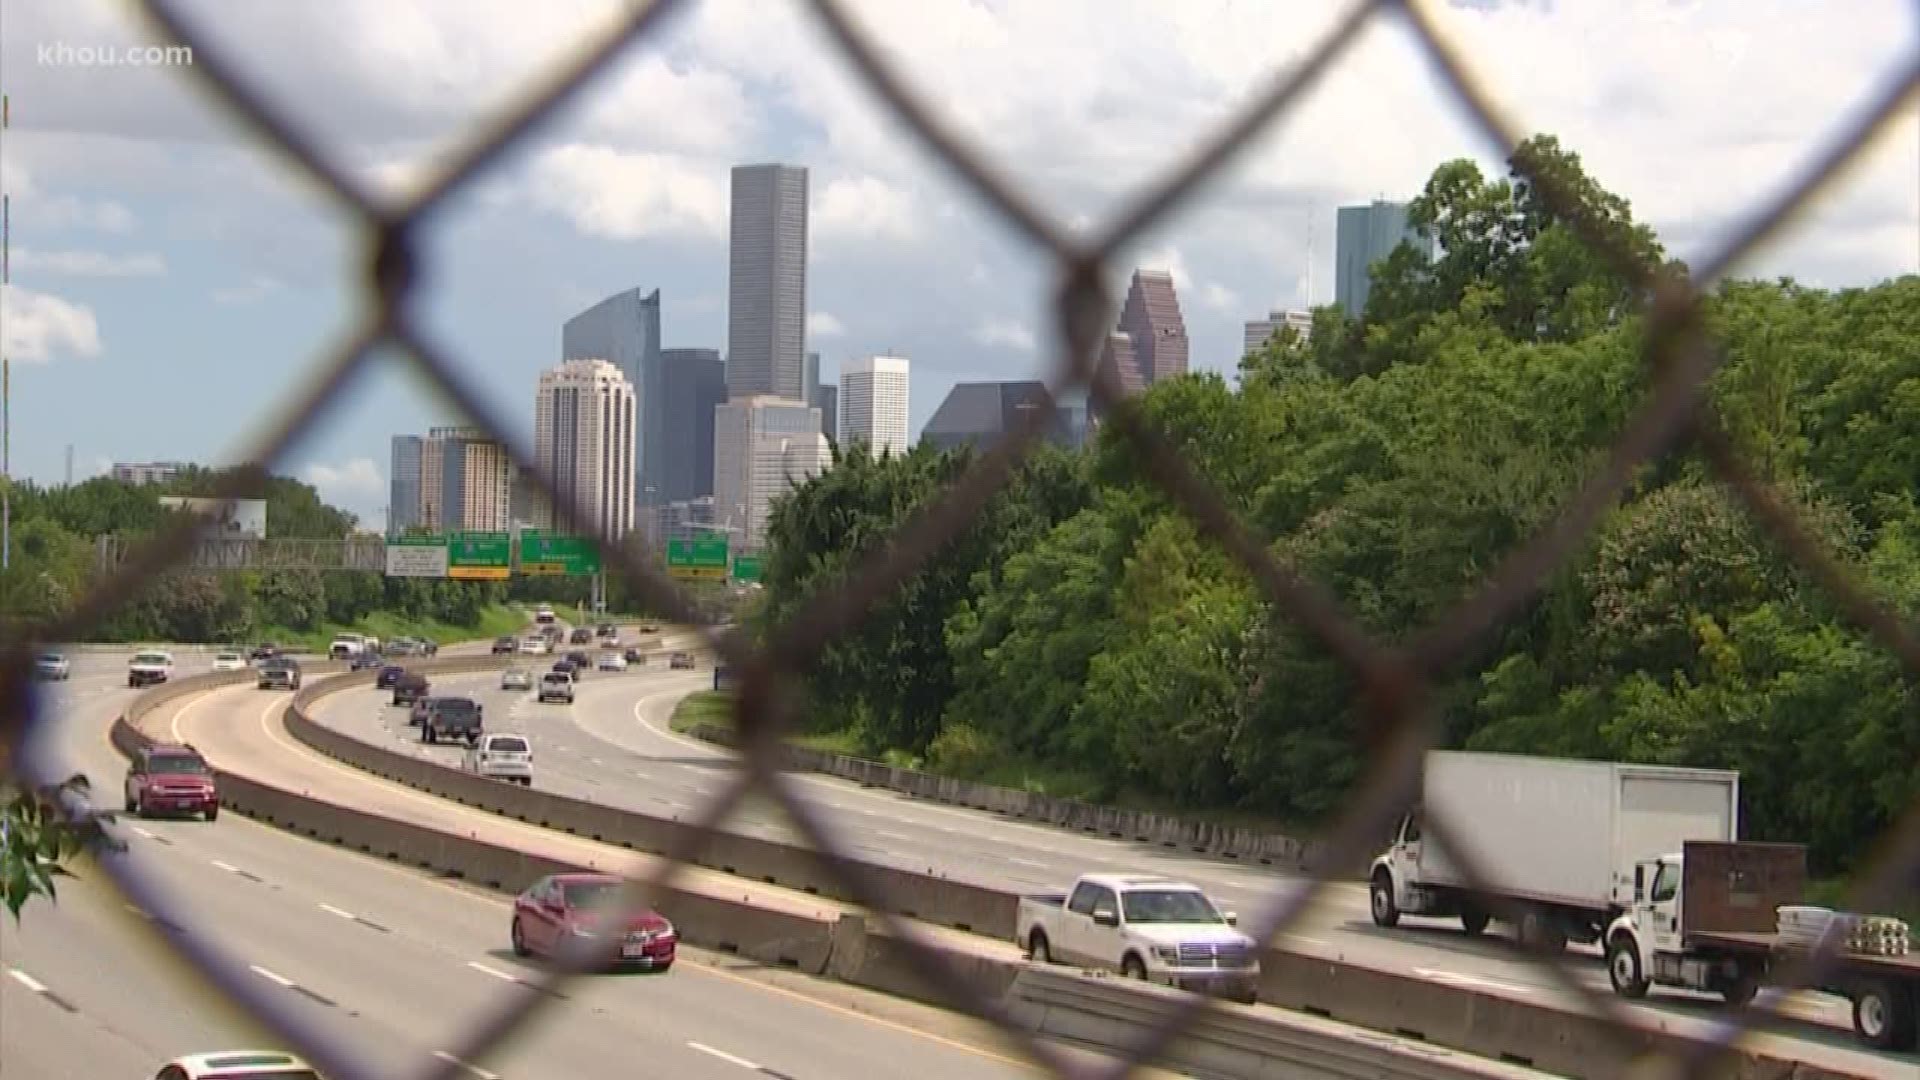 Are you dreading your Monday morning commute? We get it. Houston has the second most expensive commute in the country, according to a study by EducatedDriver.org.